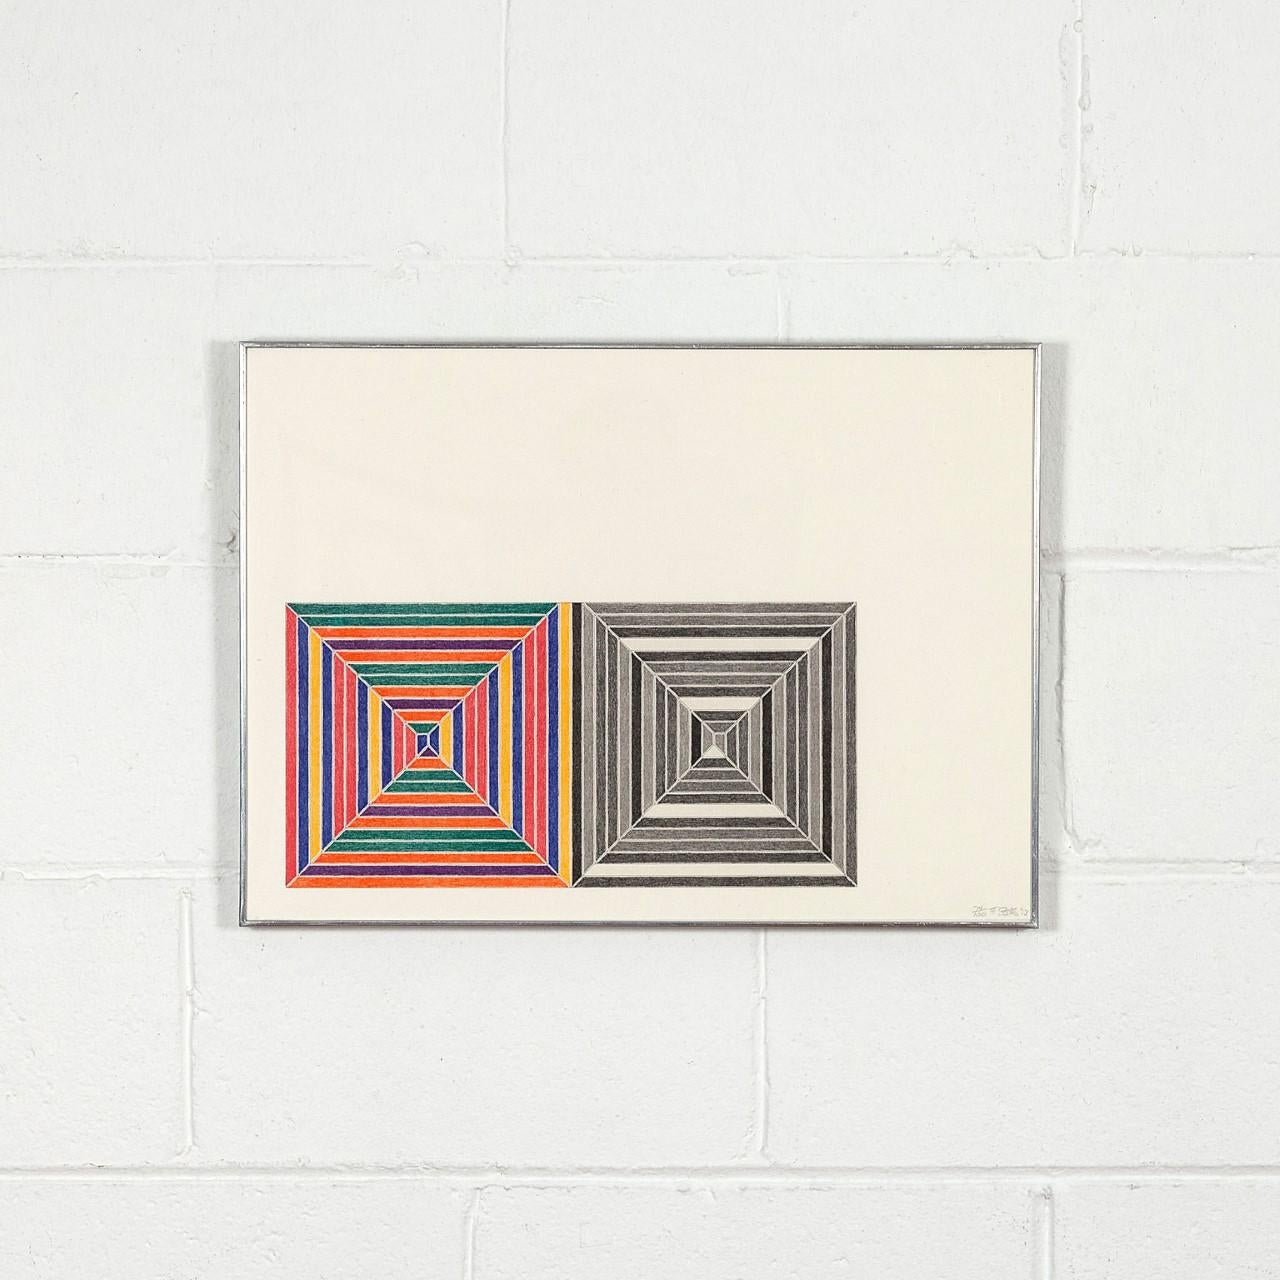 The title of this series of Frank Stella lithographs, "Les Indes Galantes" references a French opera-ballet composed in the 17th century. 

Like many of Stella's creations the connection between the artwork and the title is ambiguous or even